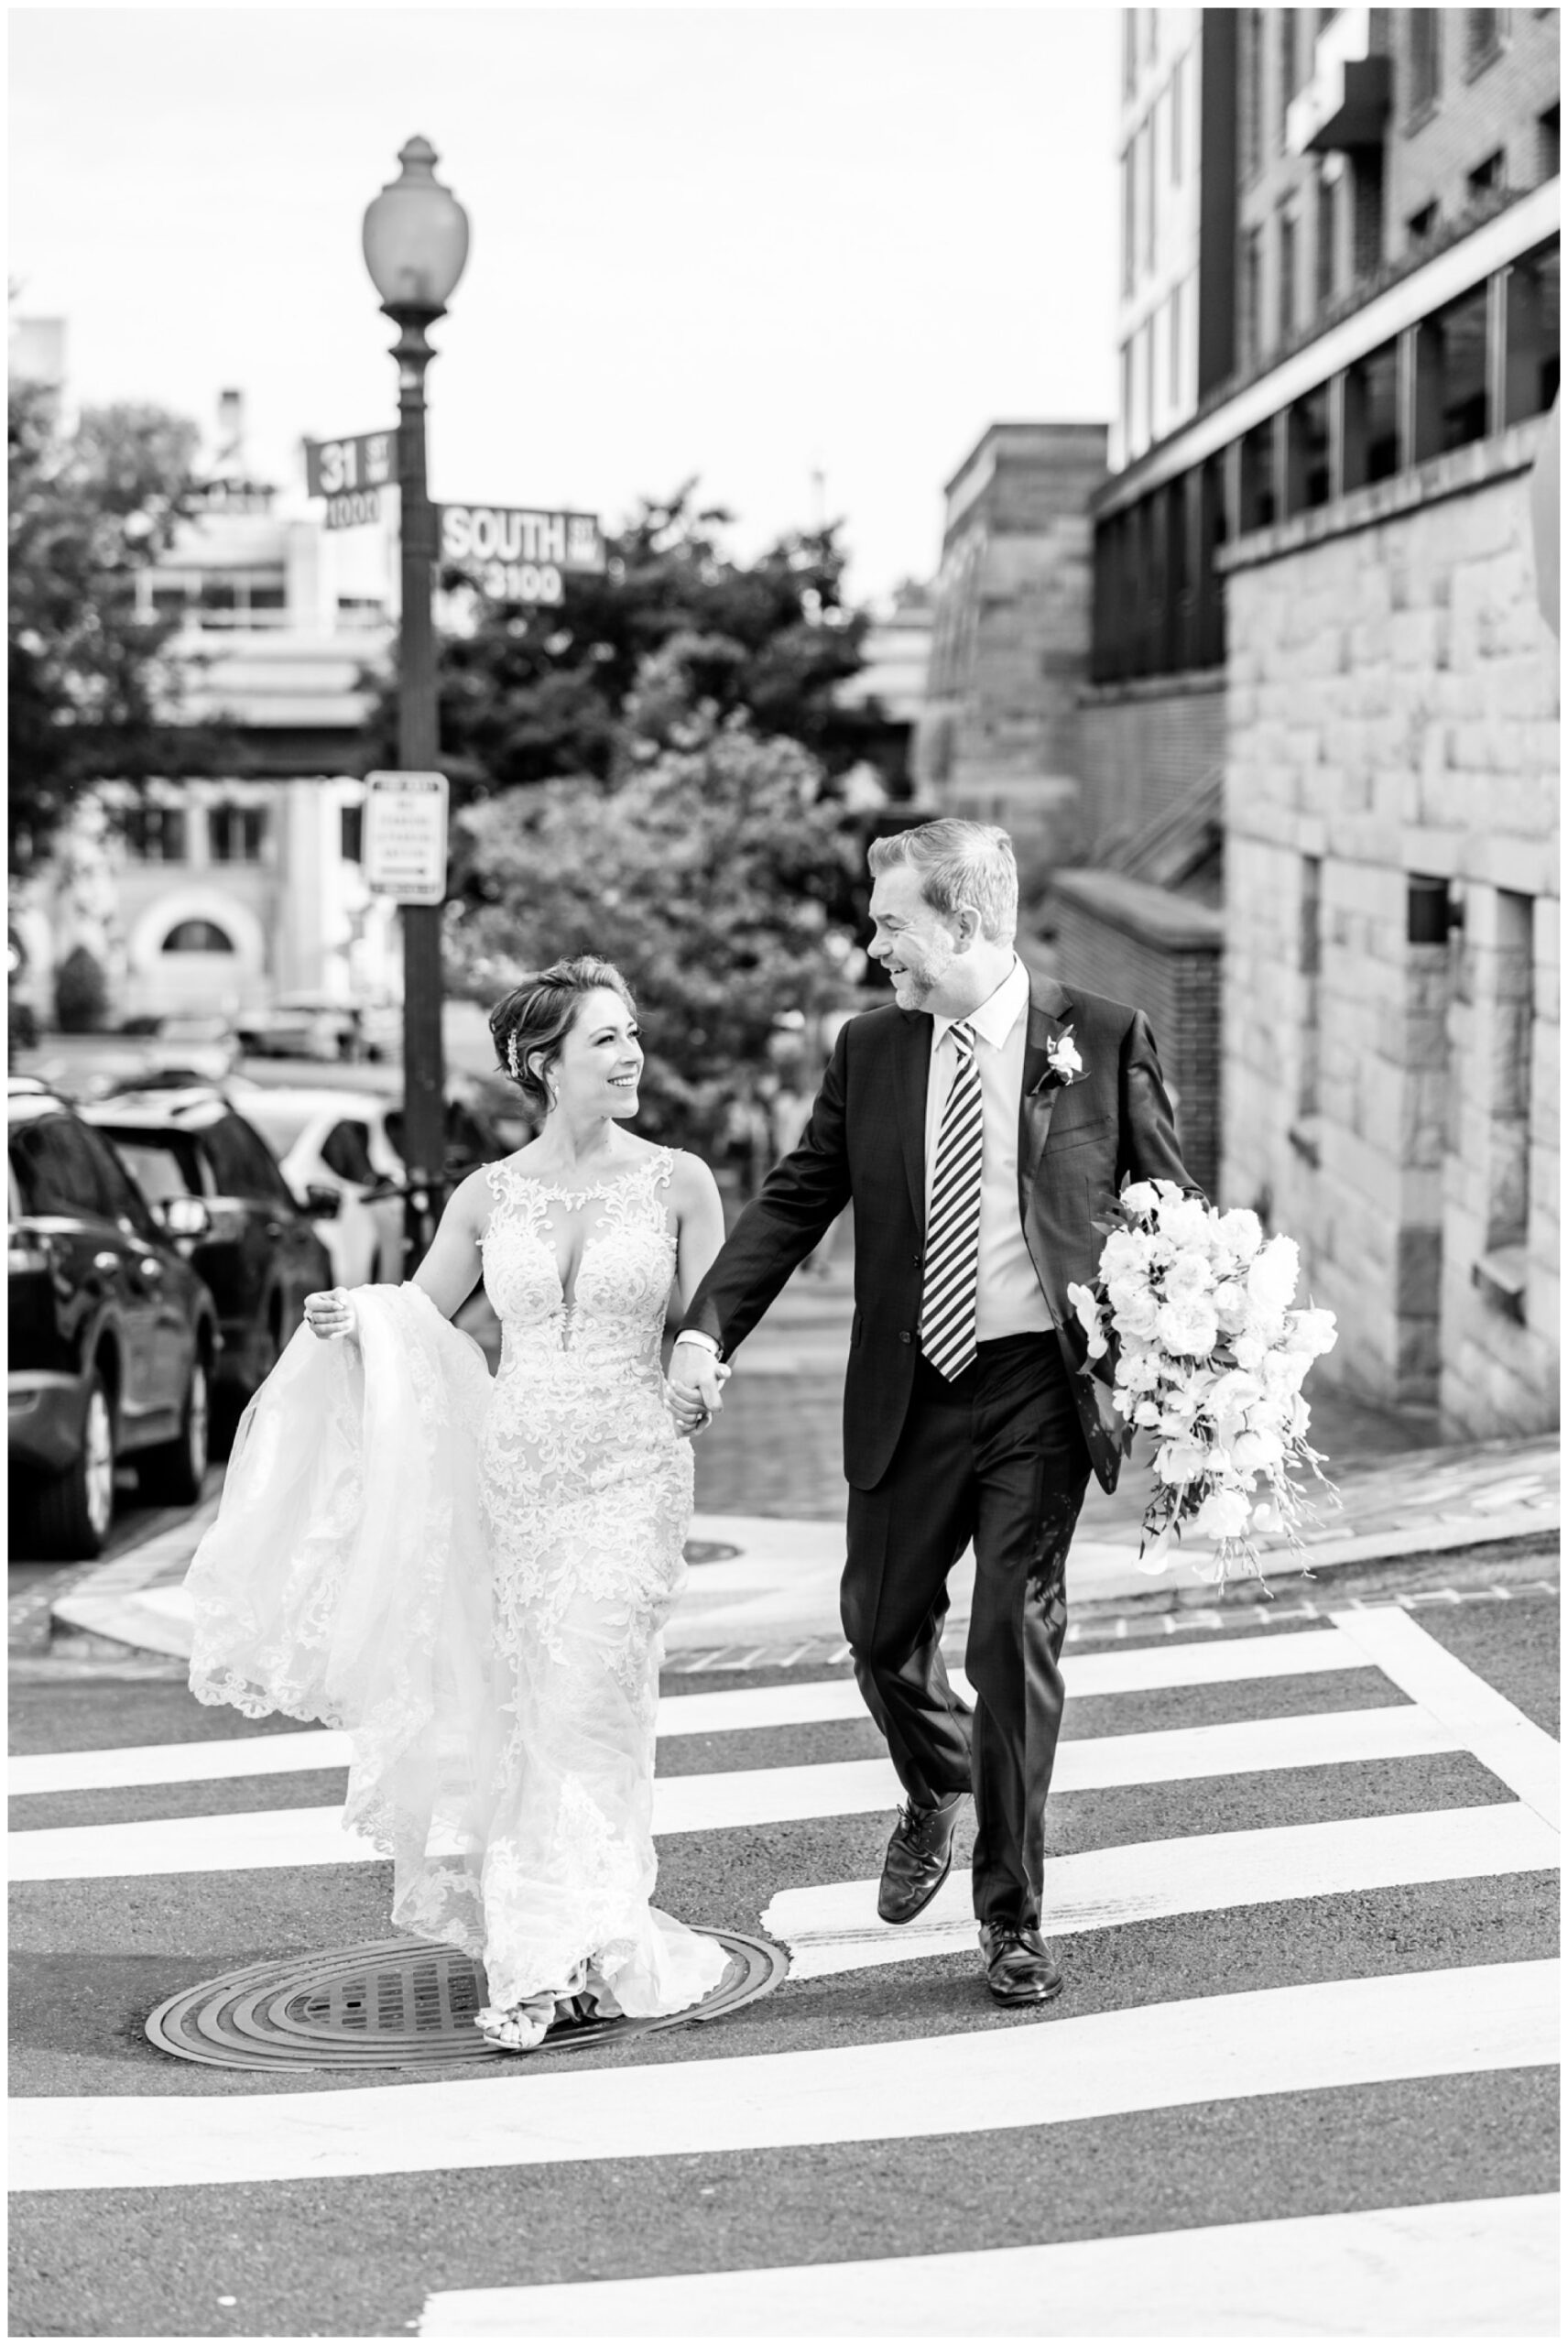 romantic Ritz Carlton Georgetown wedding, summer wedding aesthetic, green and white aesthetic, summer D.C. wedding, D.C. wedding venues, Ritz Carlton wedding, Washington D.C. wedding, romantic wedding aesthetic, Georgetown wedding, Rachel E.H. Photography, D.C. photographer, couple holding hands, black and white, bride and groom walking down sidewalk, groom holding bouquet